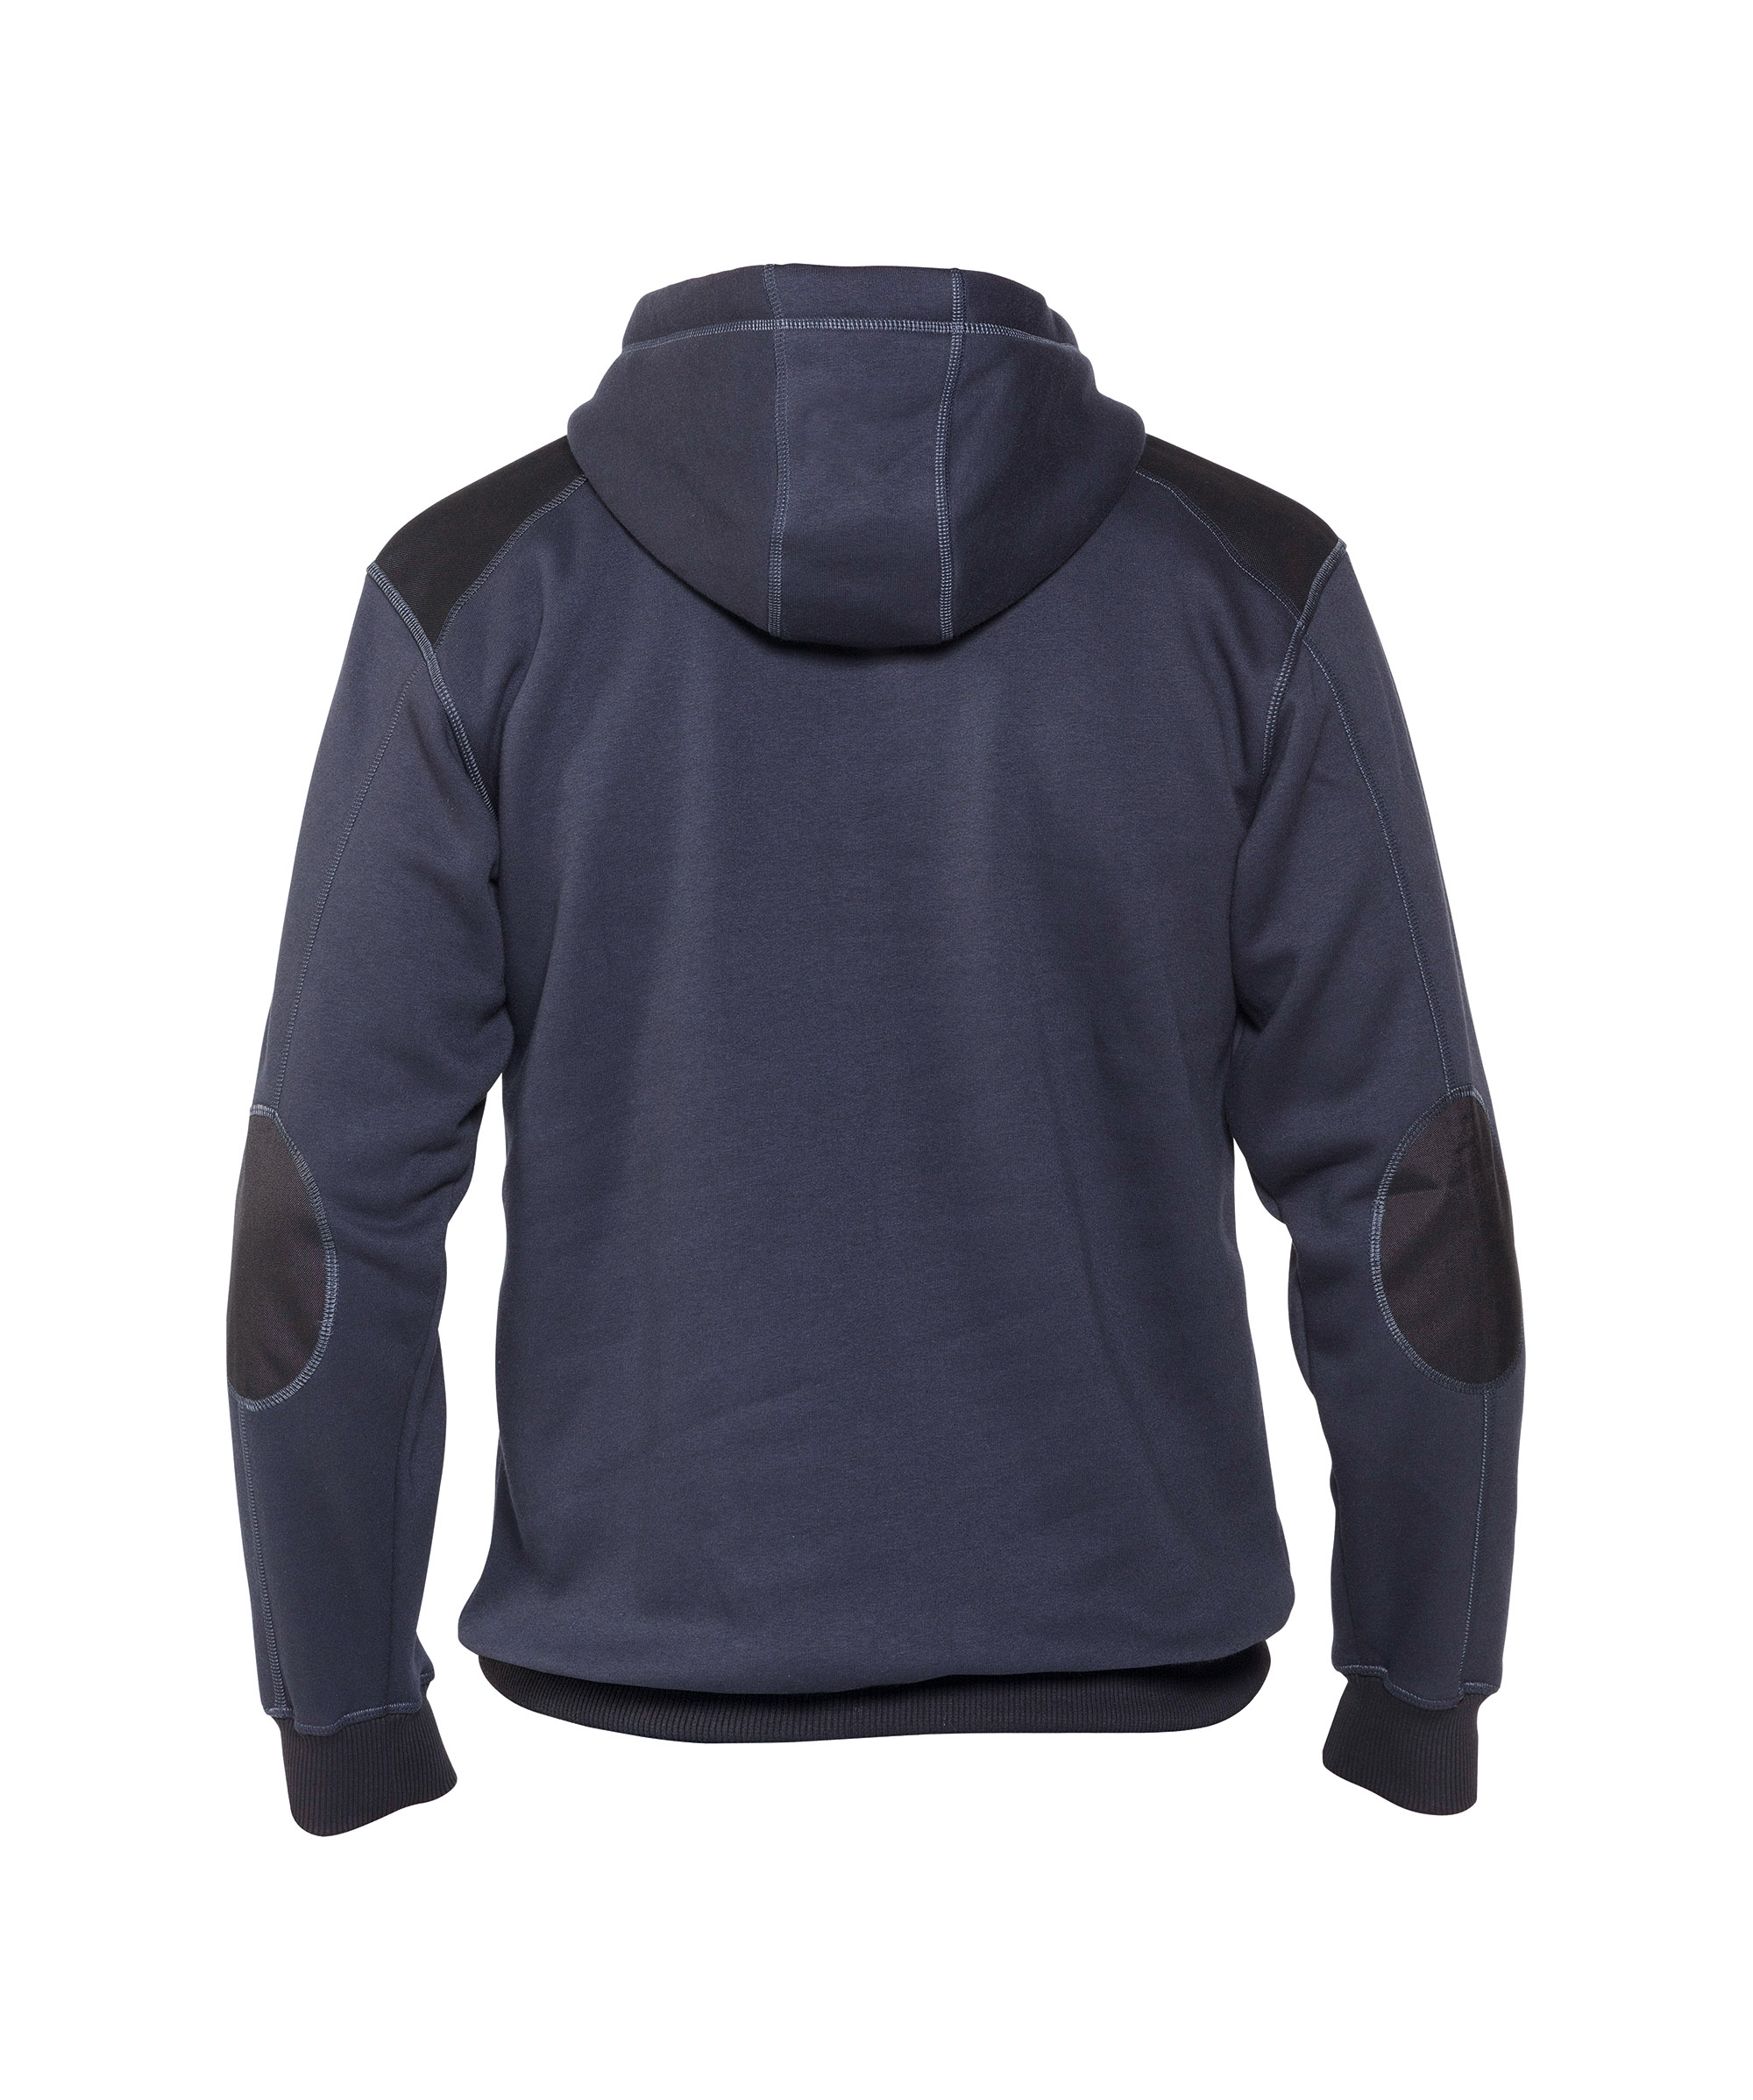 indy_hooded-sweatshirt-reinforced-with-canvas_midnight-blue-black_back.jpg